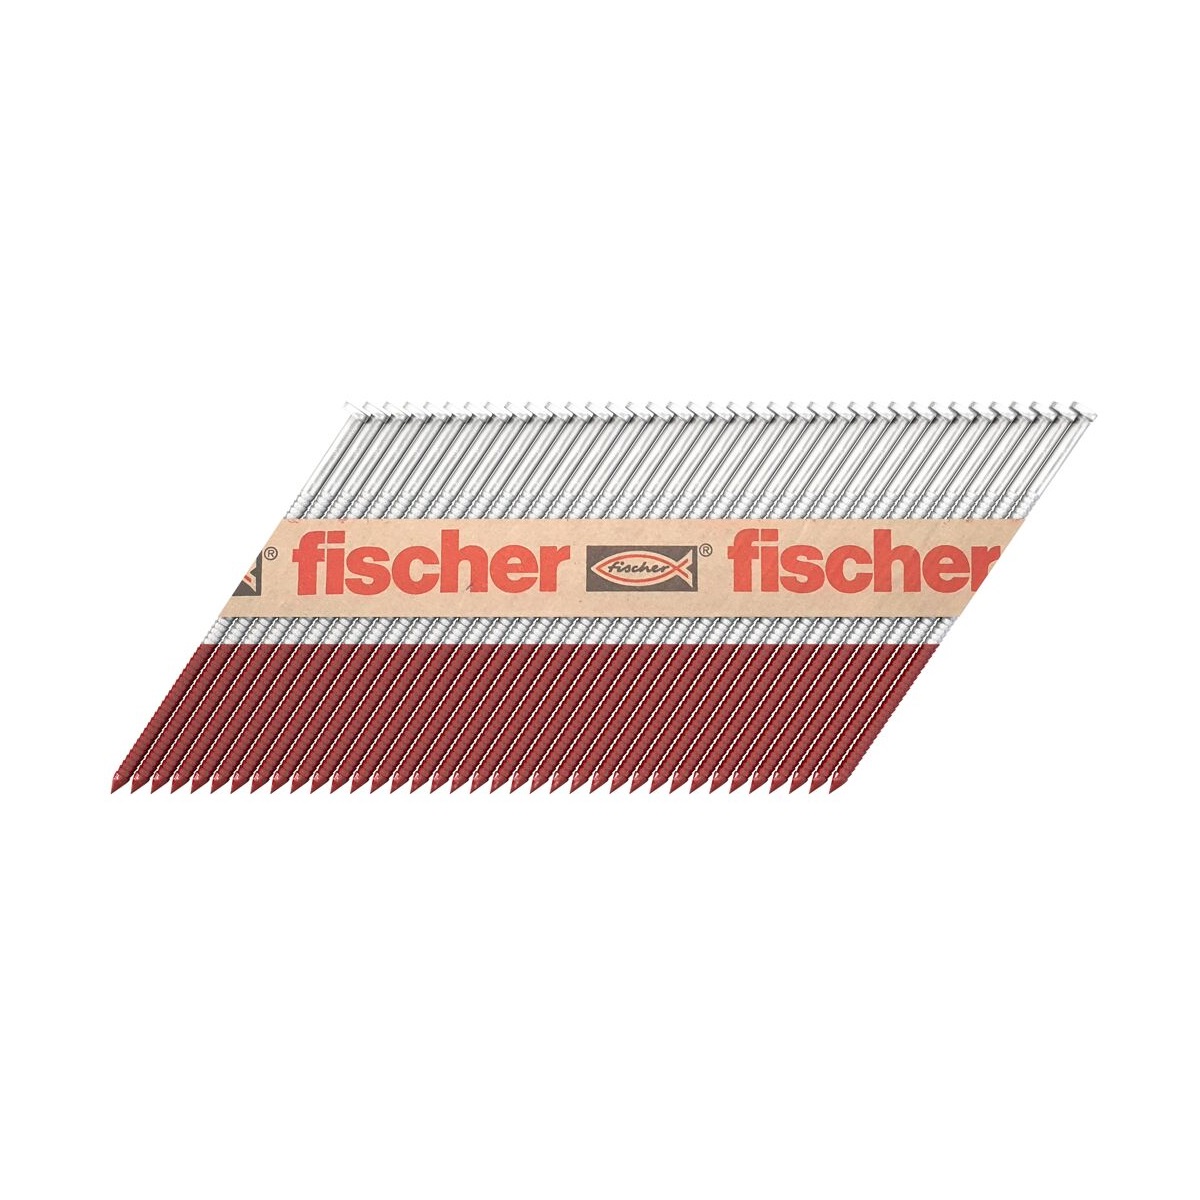 Fischer FF NFP 63x2.8mm Ring Galv 3300 N.G